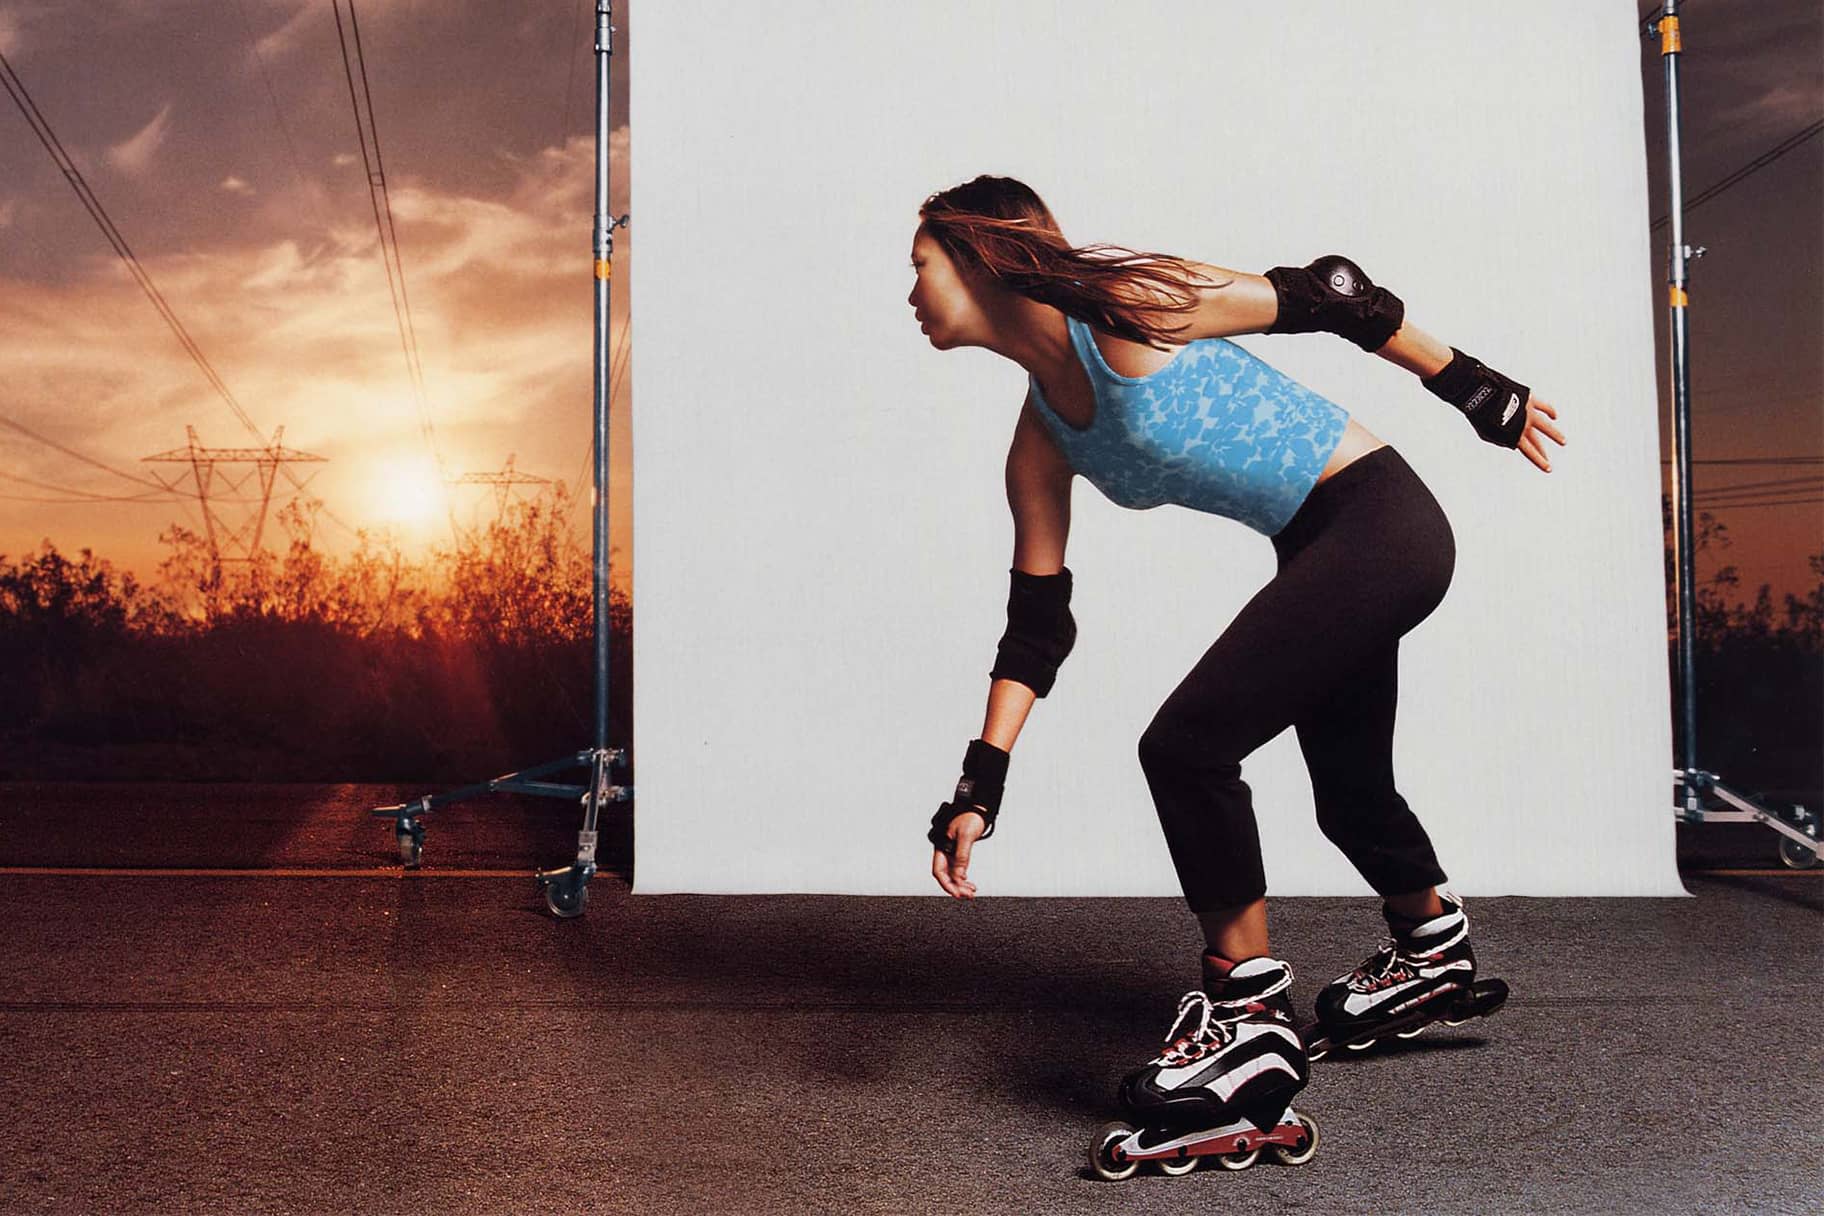 5 Health Benefits of Rollerblading, According to Experts